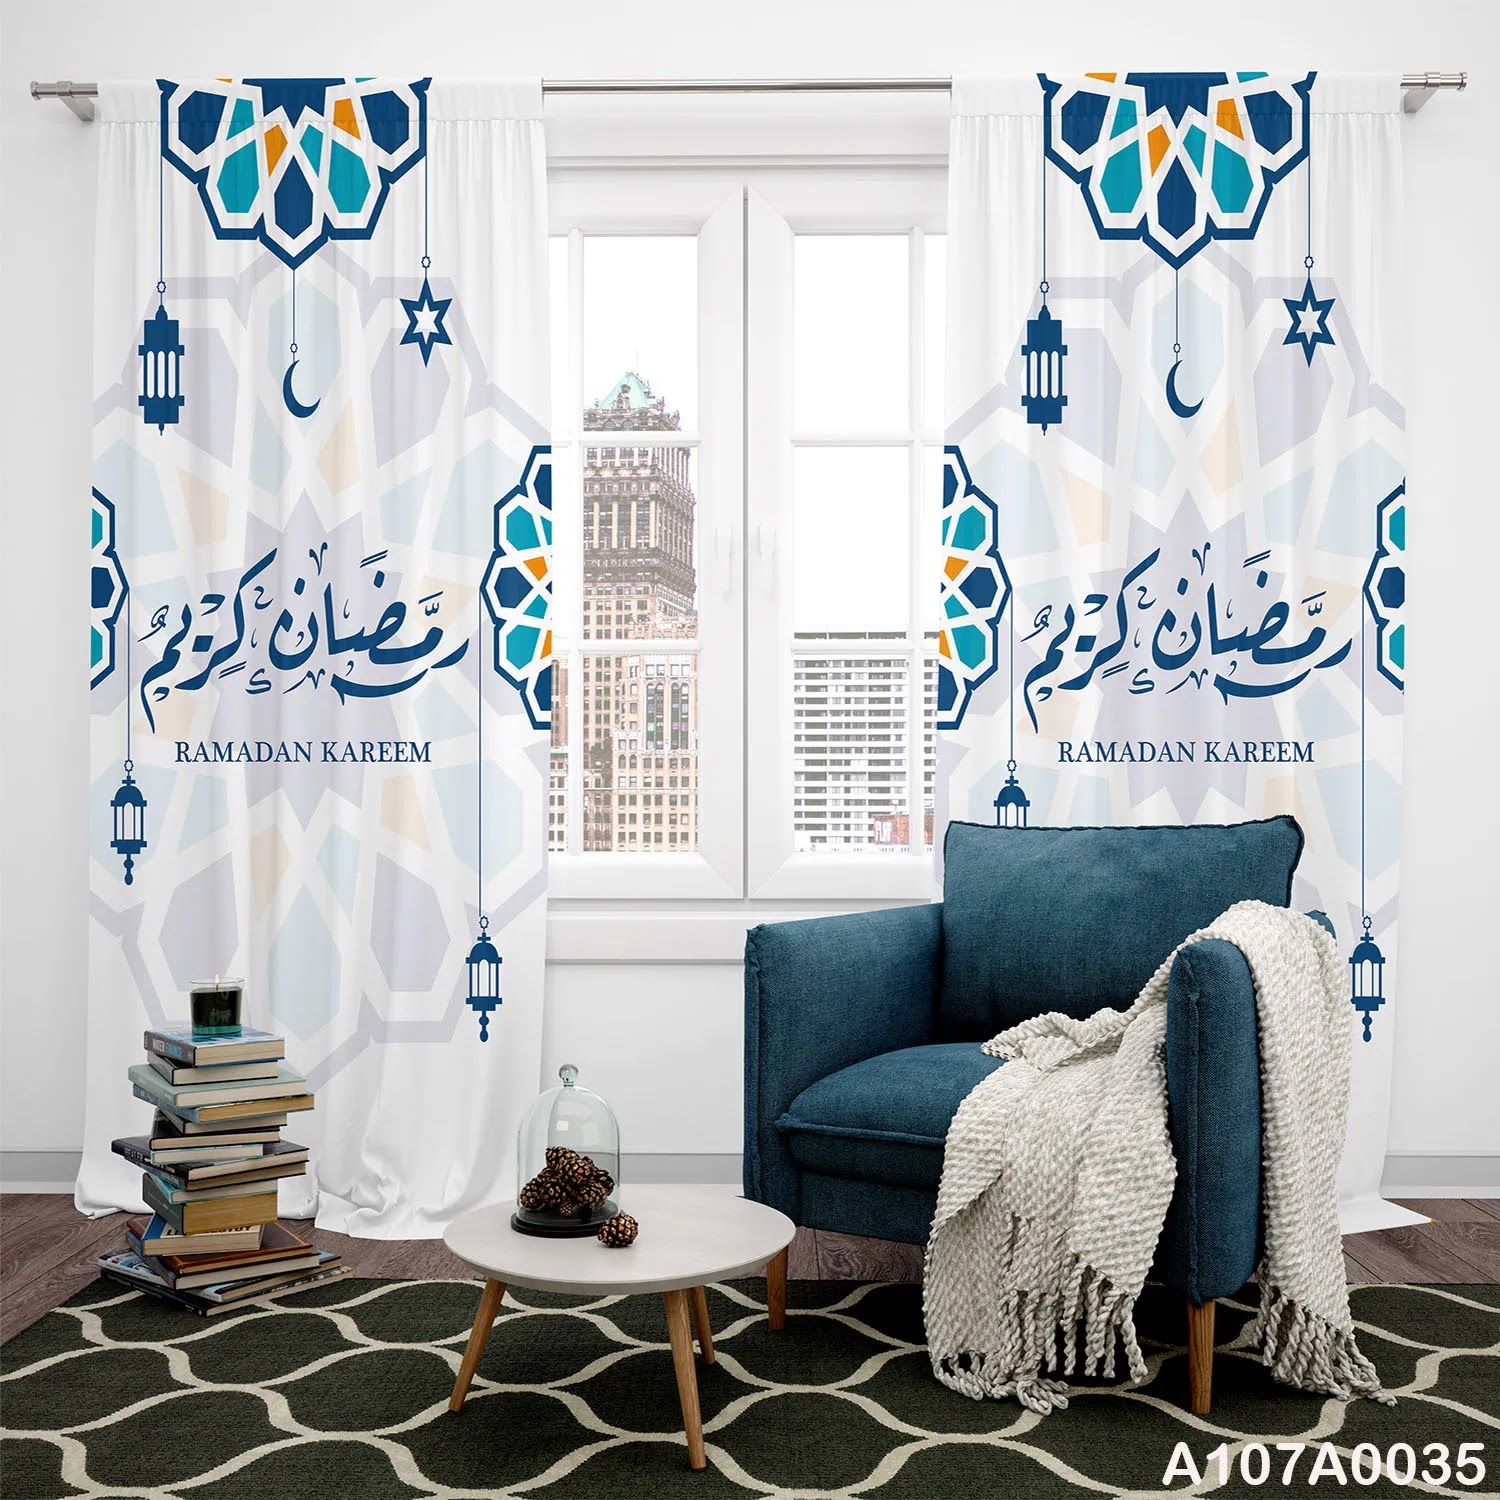 Curtains for Ramadan in white and blue